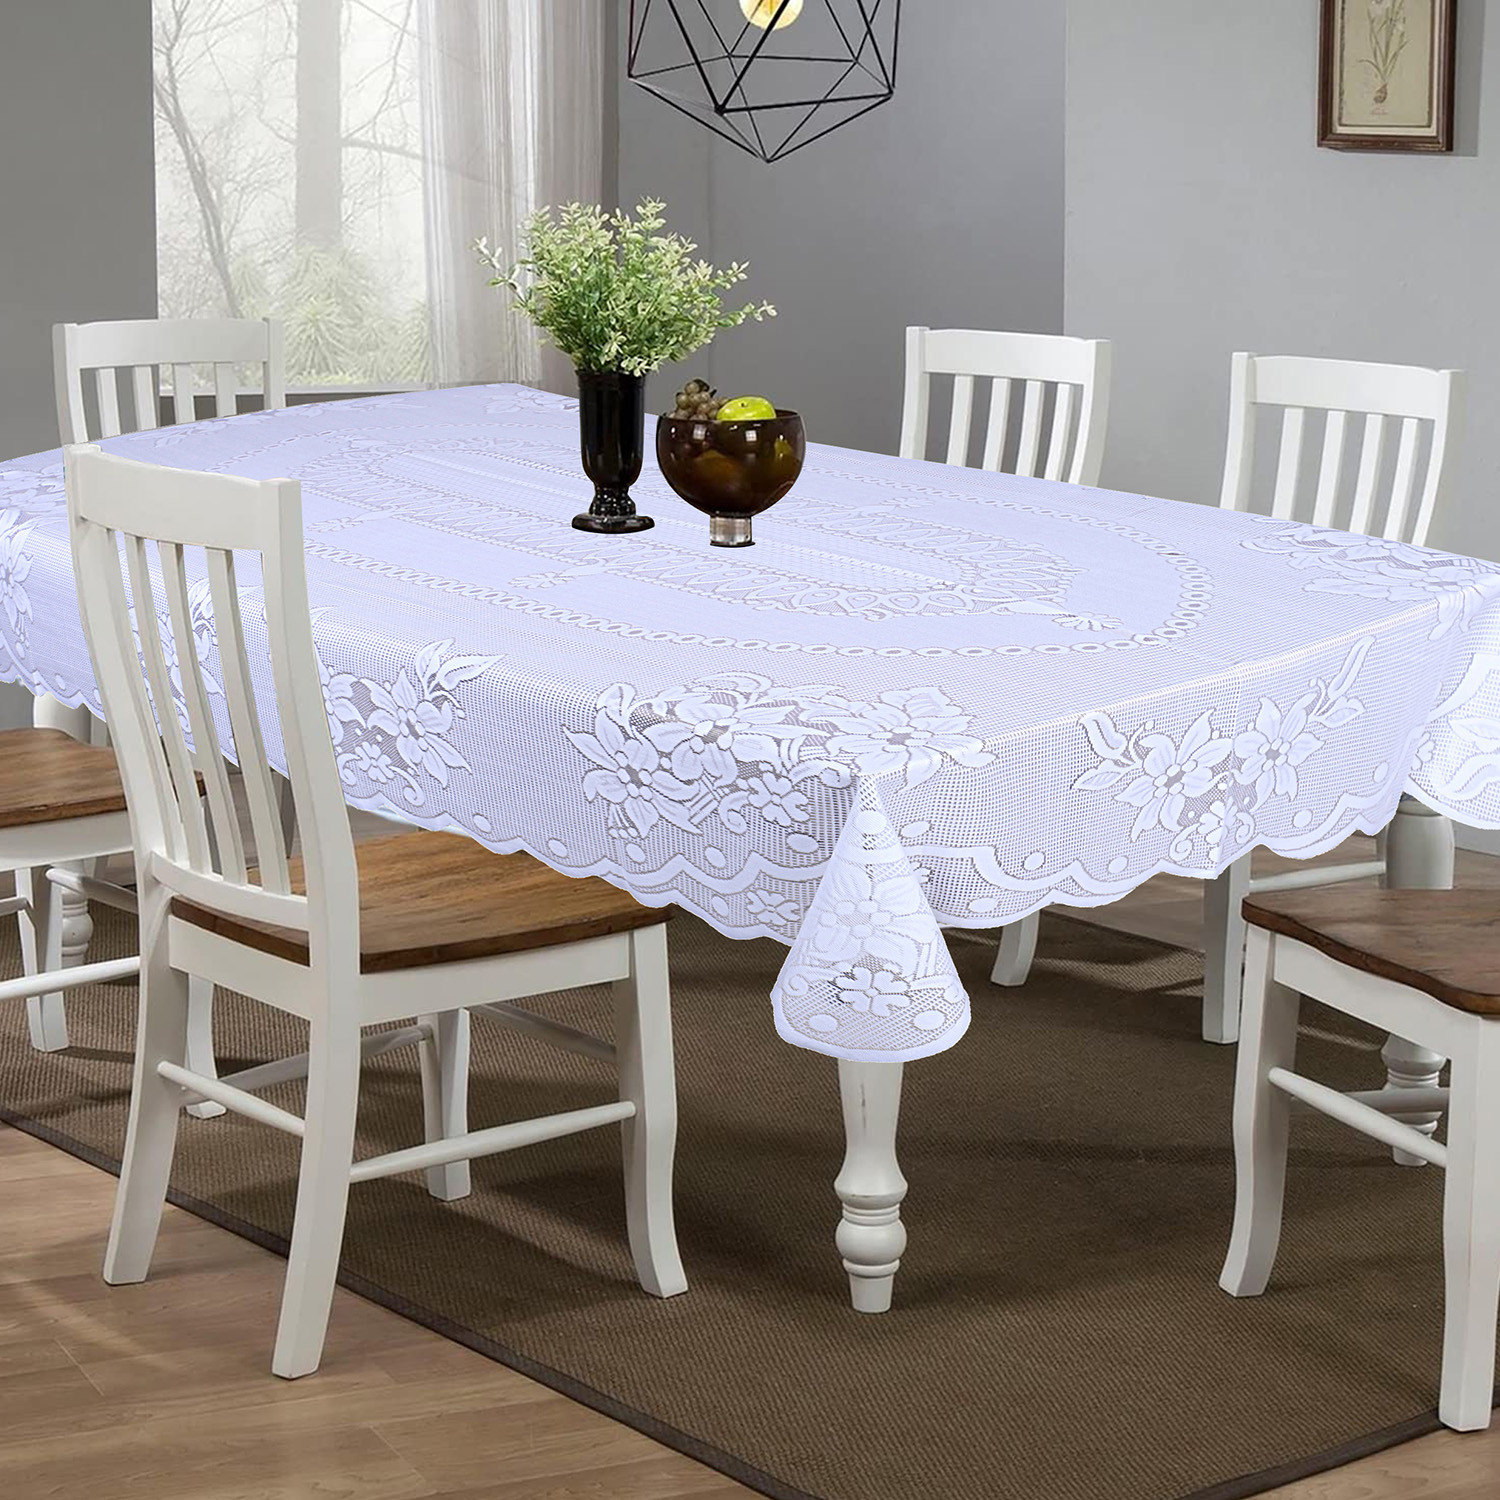 Kuber Industries Dining Table Cover|Poly Cotton Stain-Resistant Floral Pattern|Net Tablecloth Protector for Home Decoration, 60X90 Inch (White)